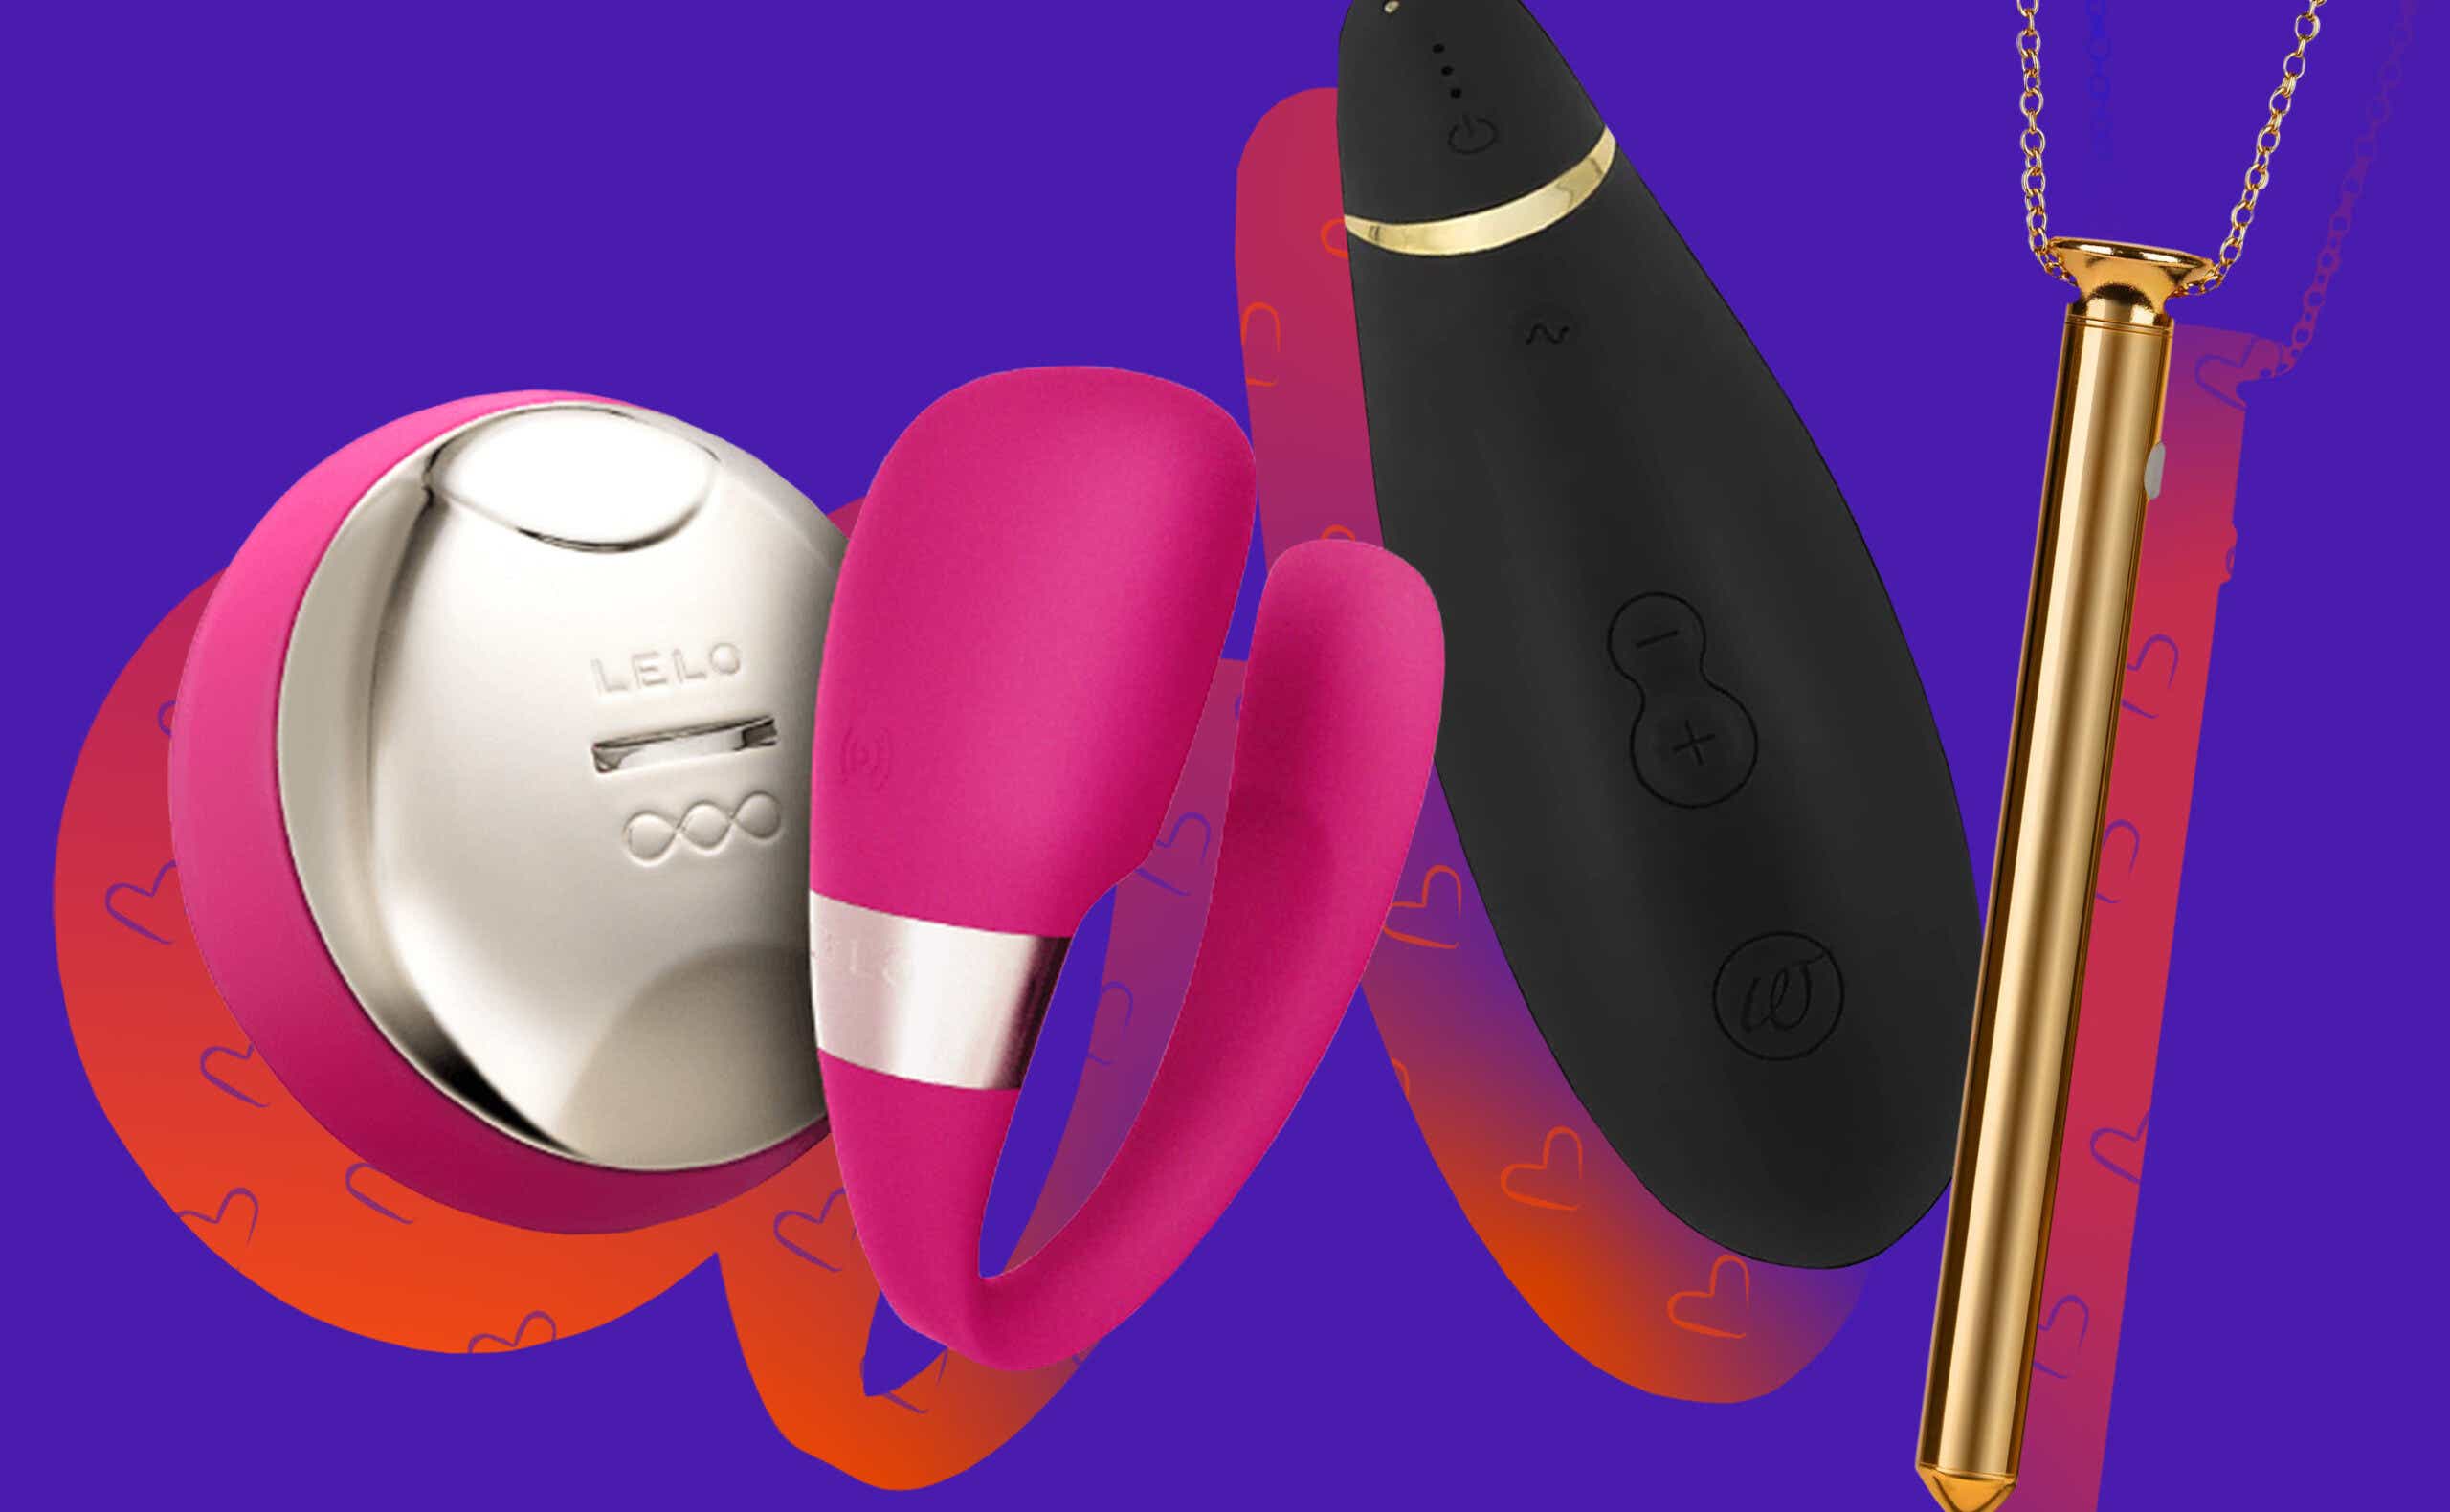 16 Best Sex Toys for Couples According to Experts picture pic